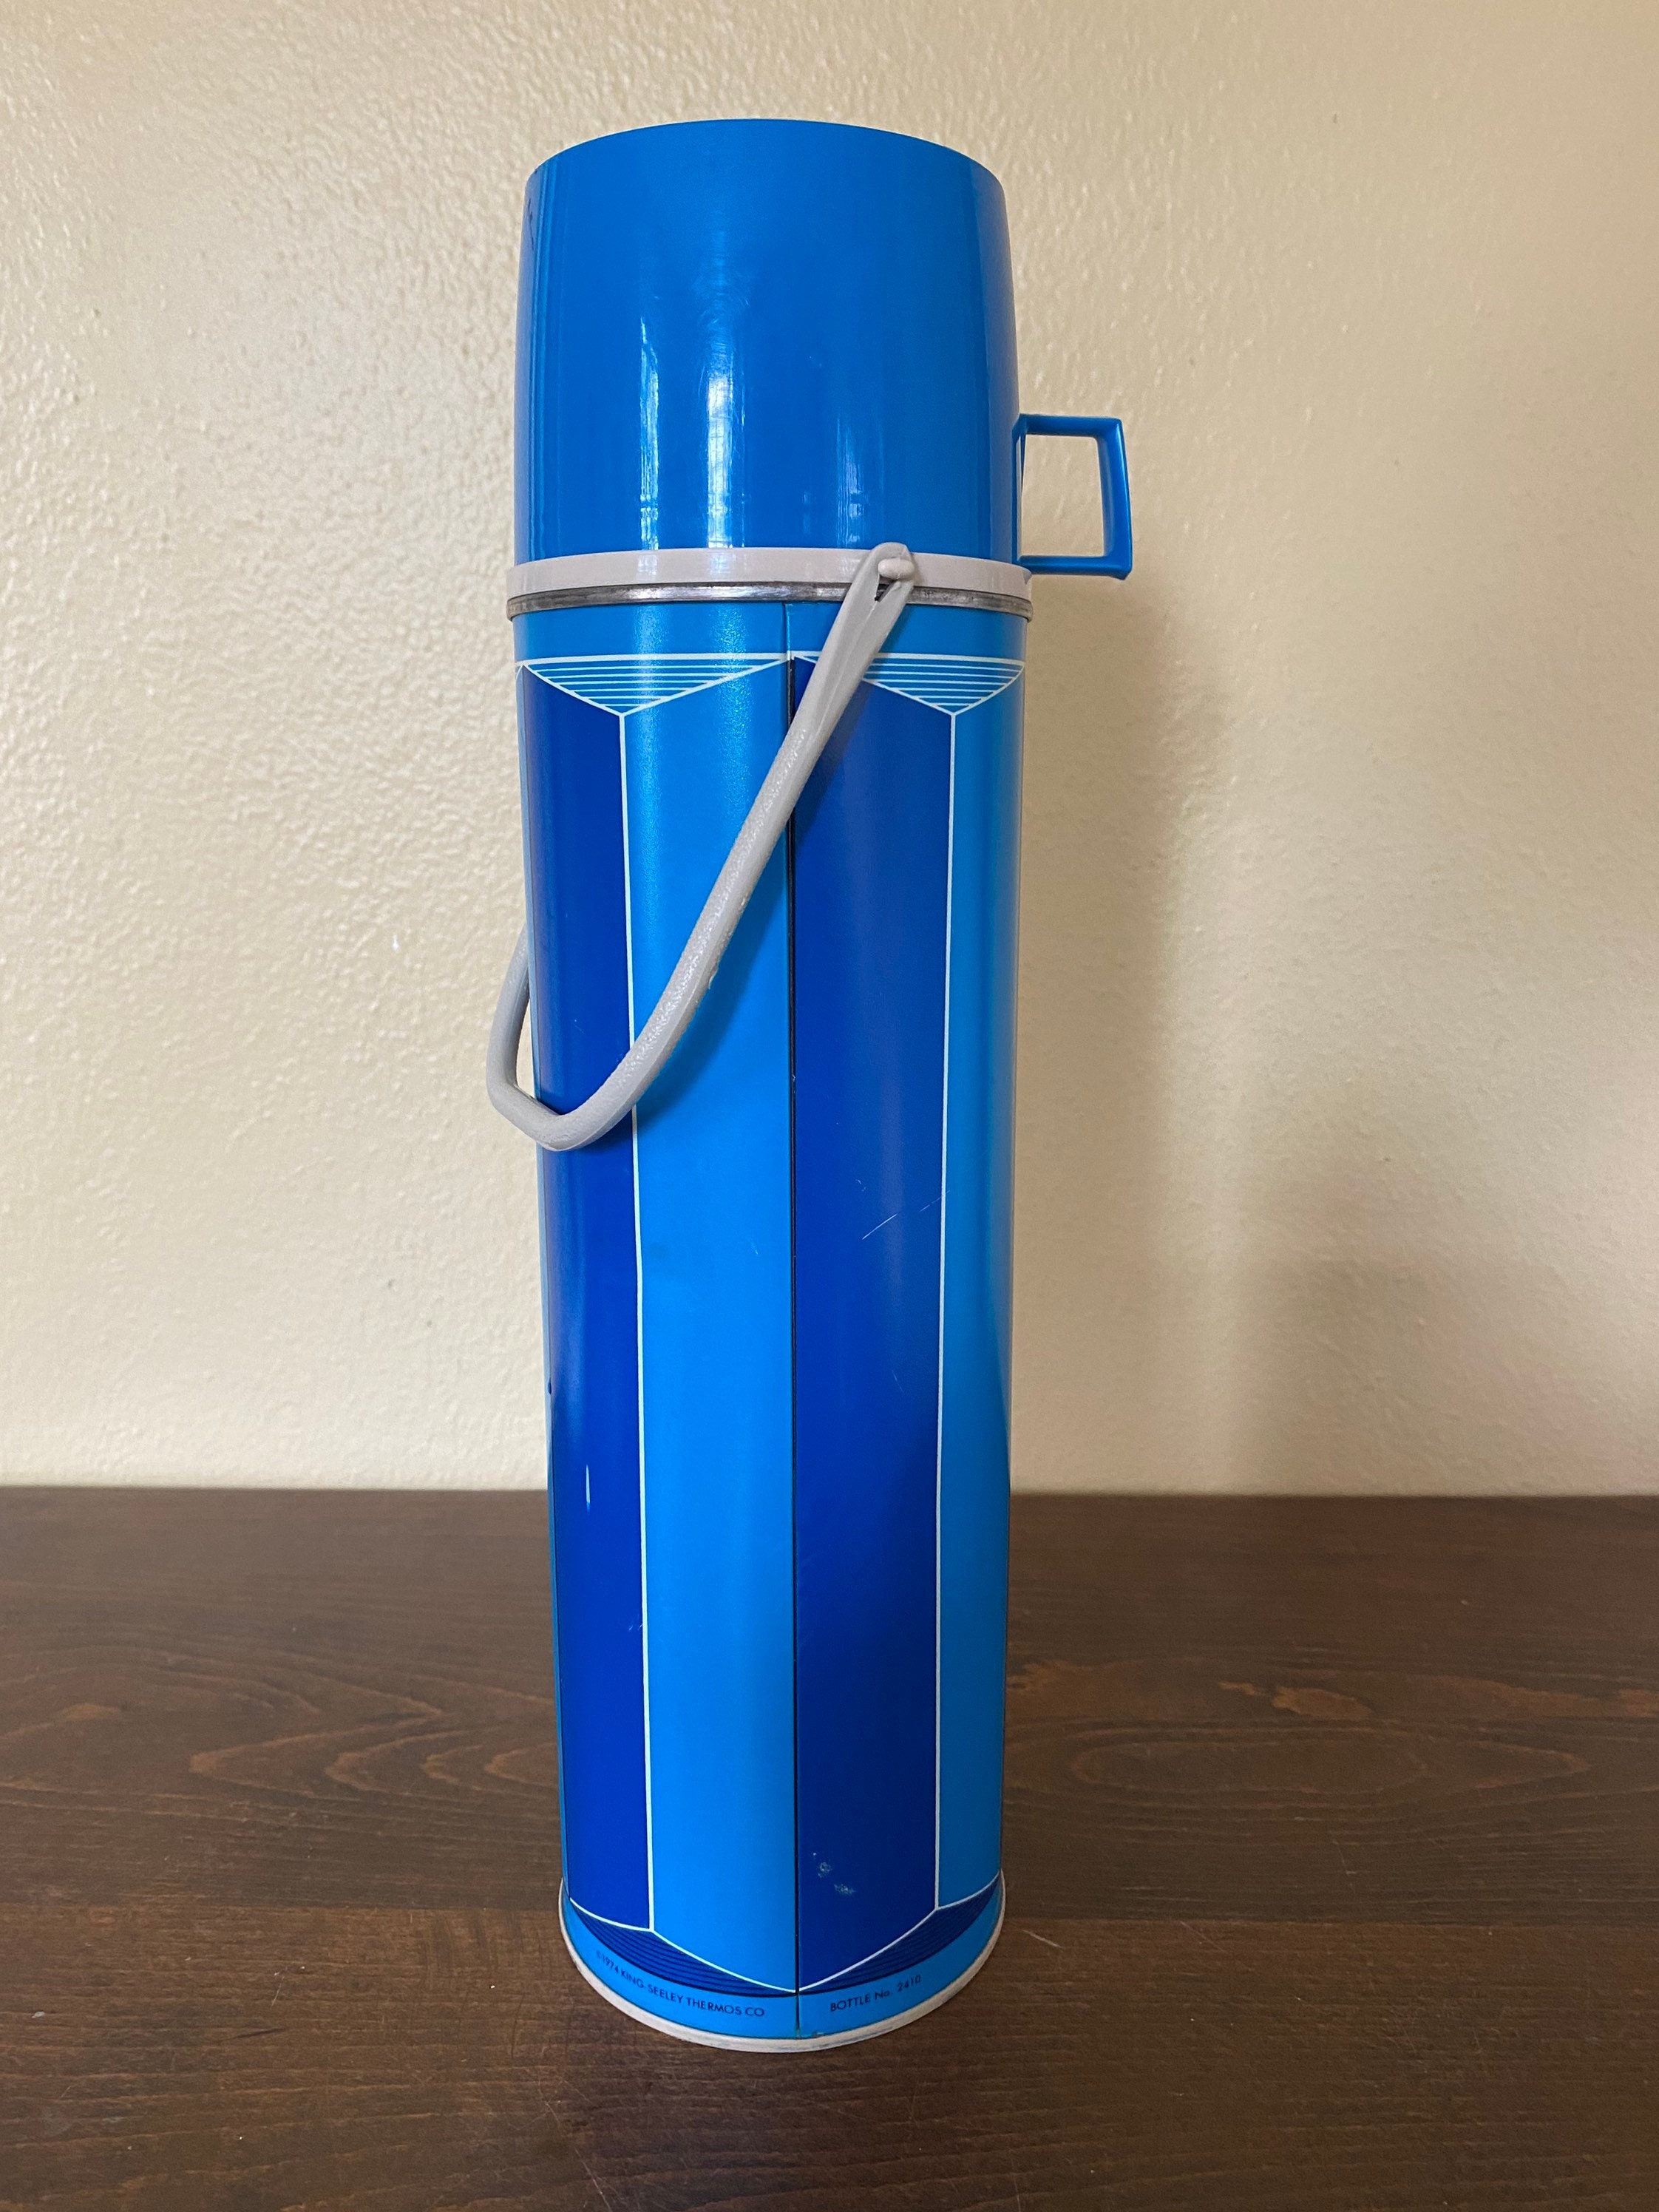 Vintage Thermos Blue 32oz Water Jug Large Insulated Plastic, 1980s Retro 